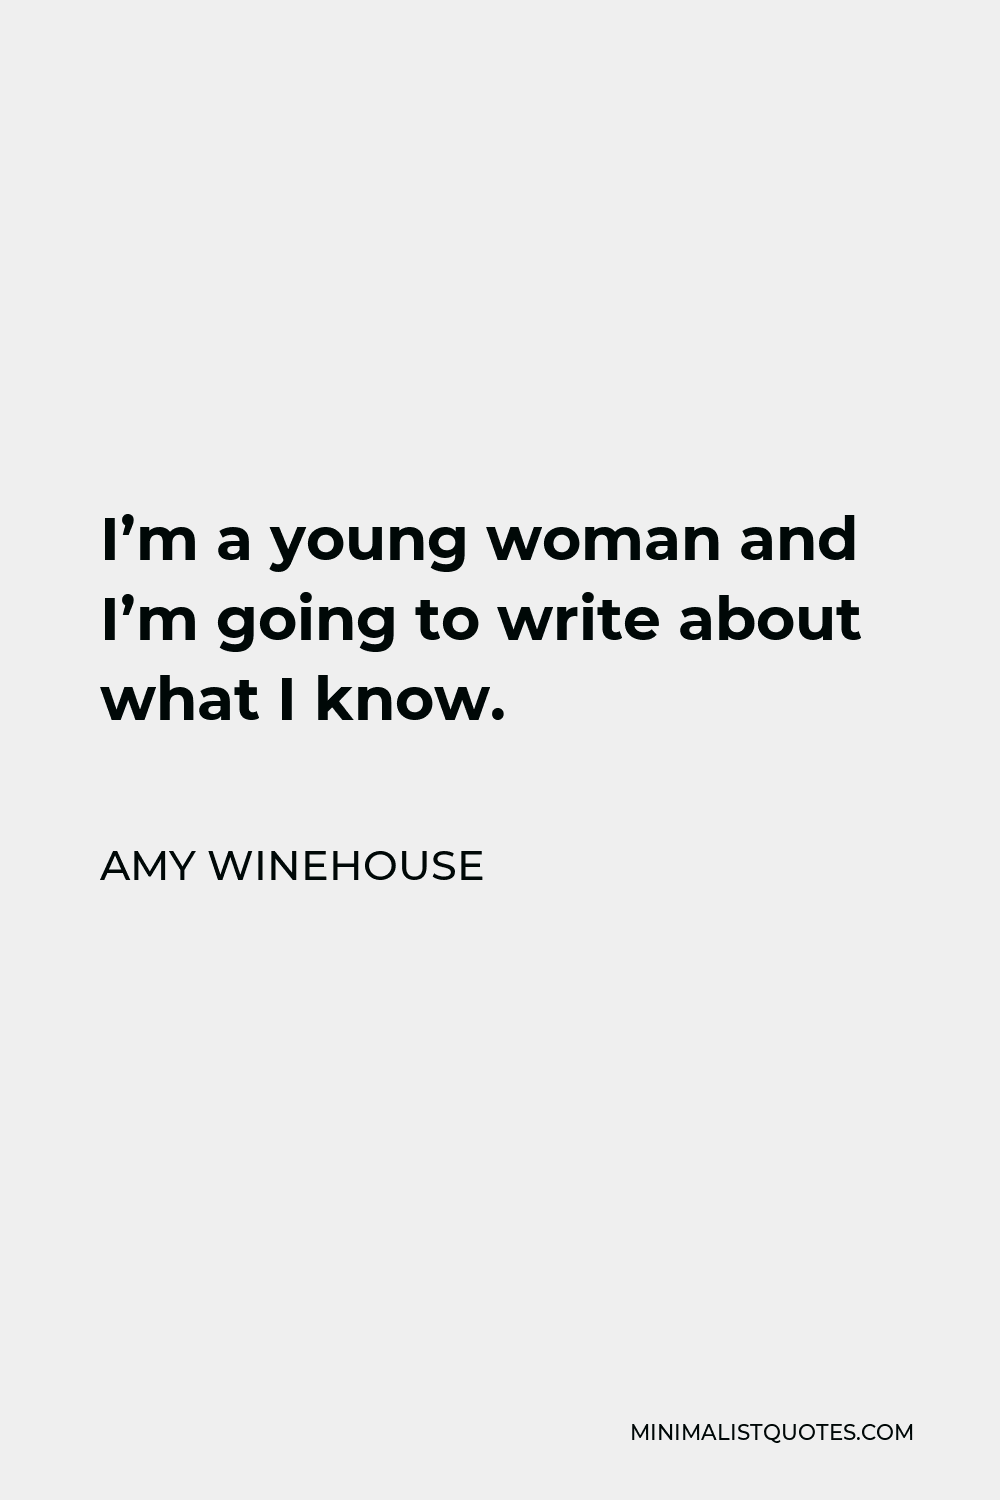 Amy Winehouse Quote - I’m a young woman and I’m going to write about what I know.